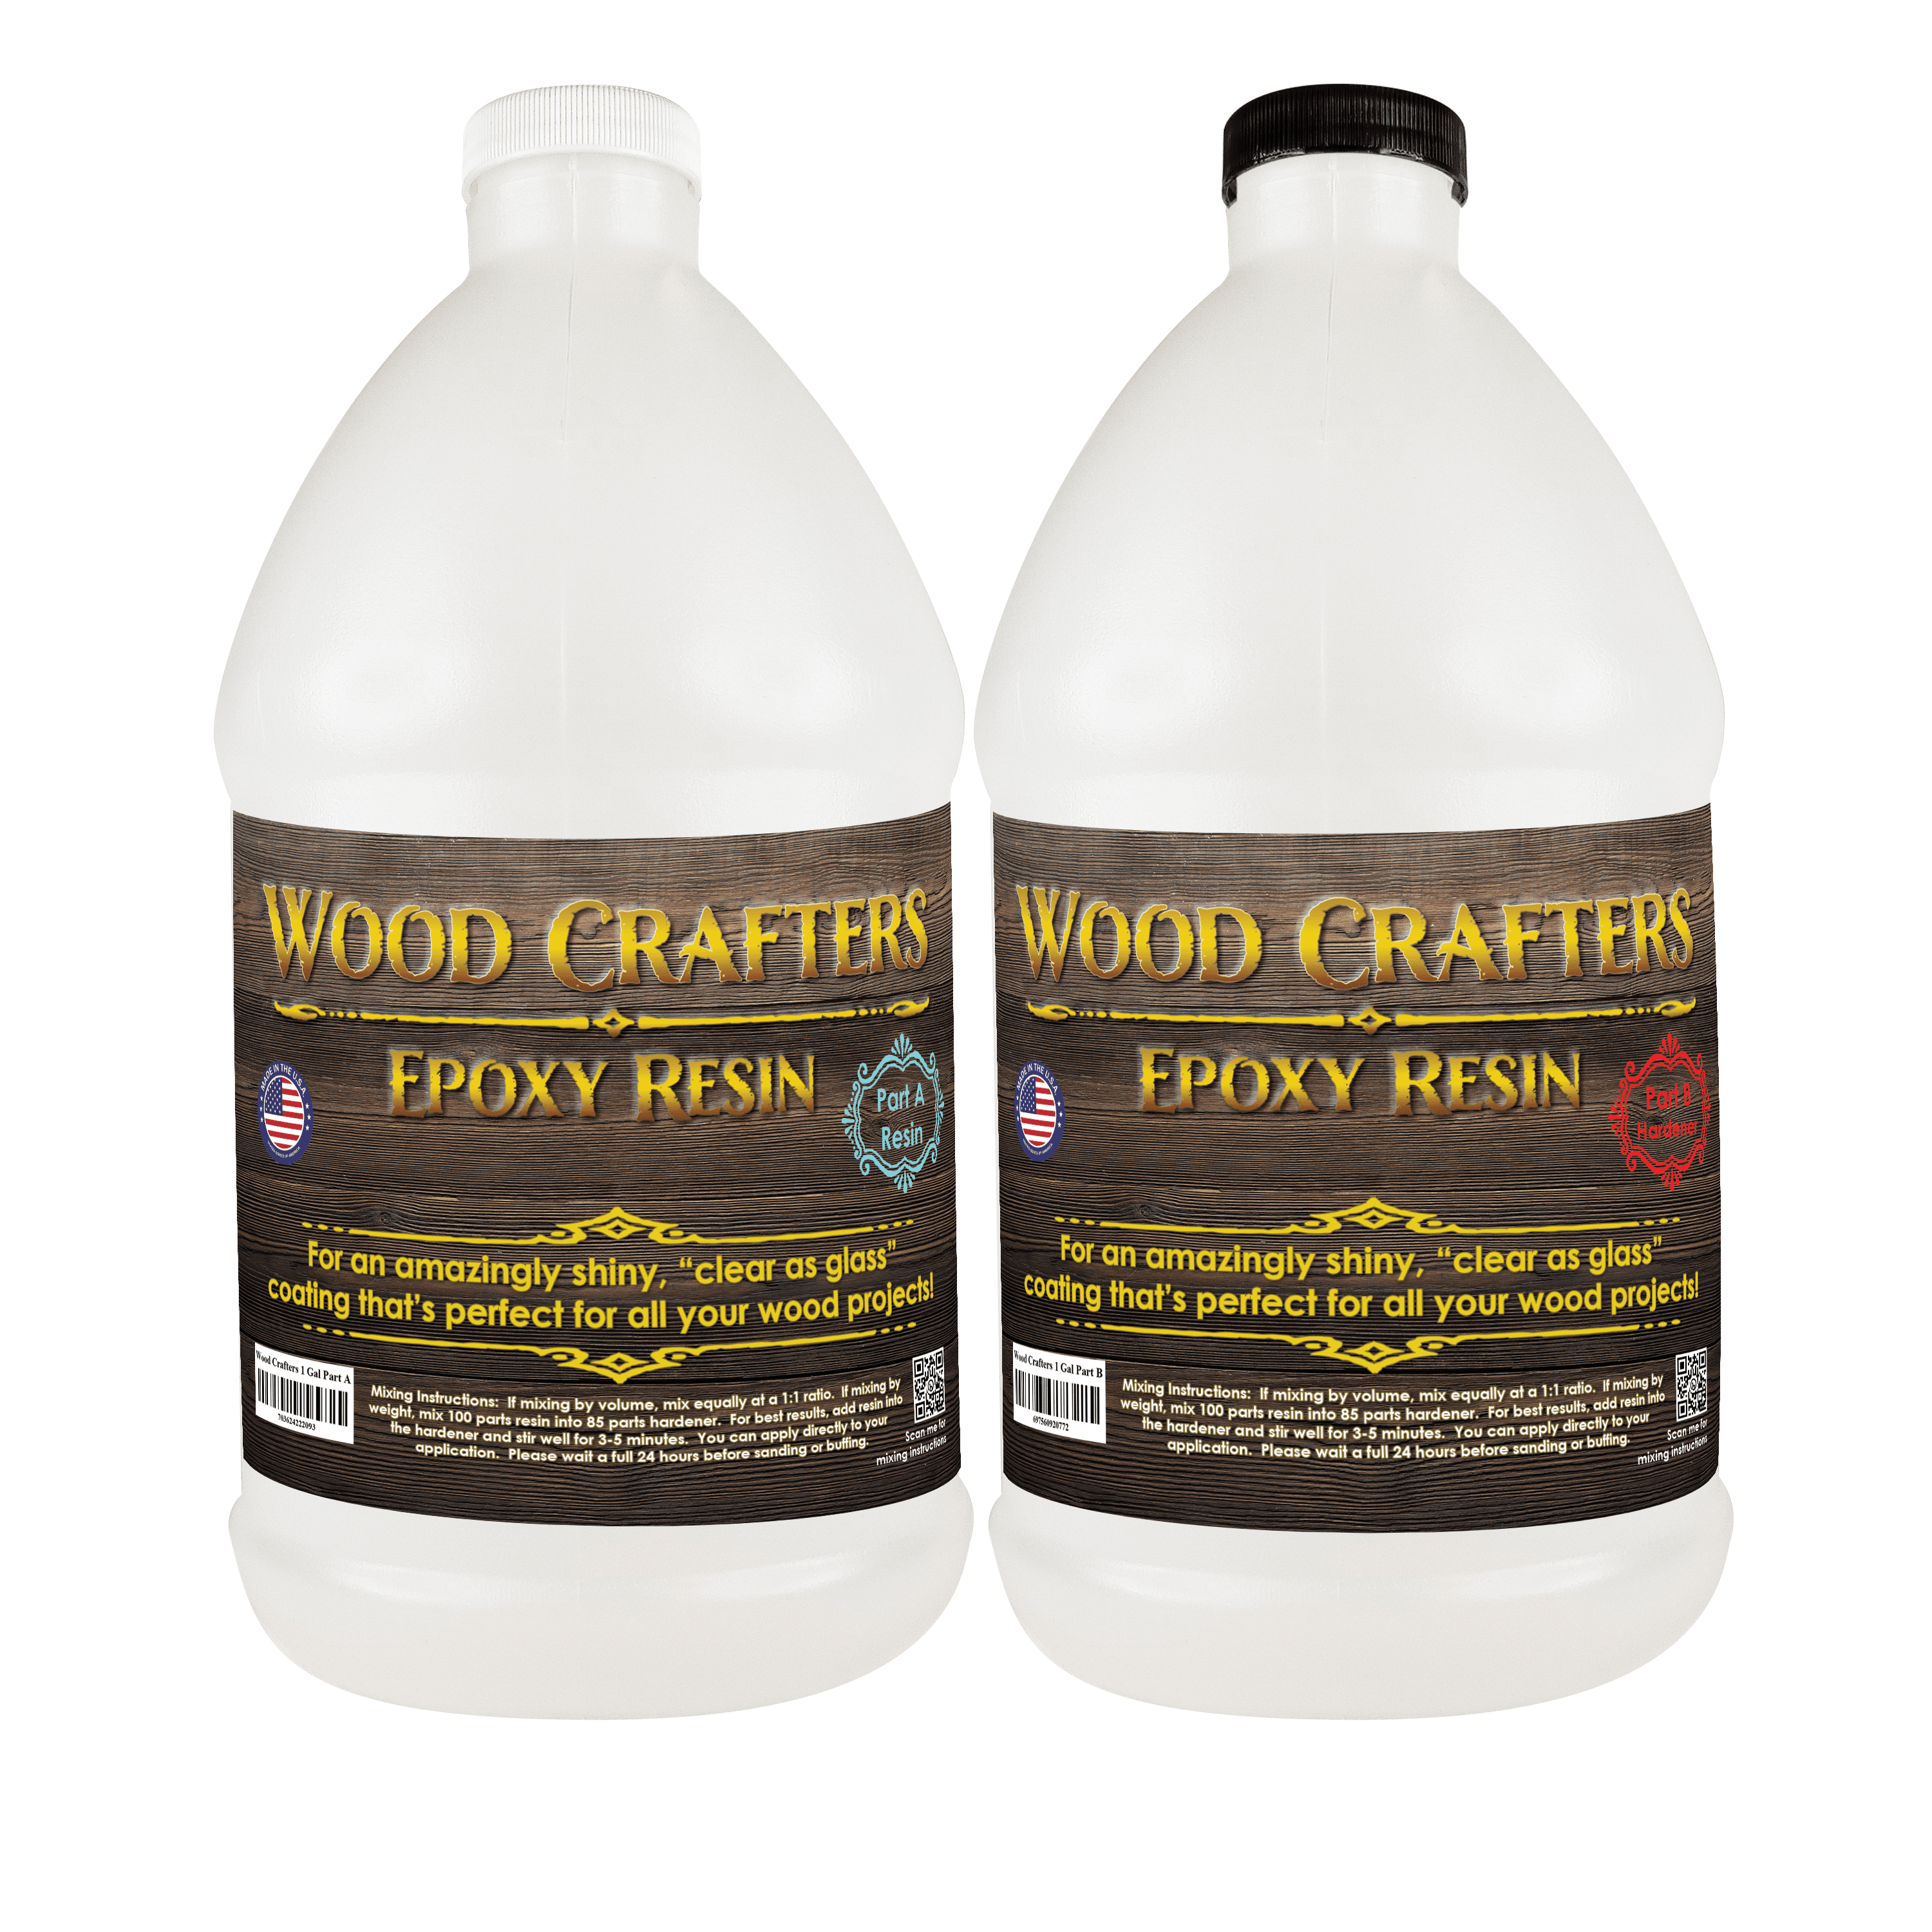 Clear Table Top Epoxy Resin Coating for Wood Tabletop - 2 Gallon Kit